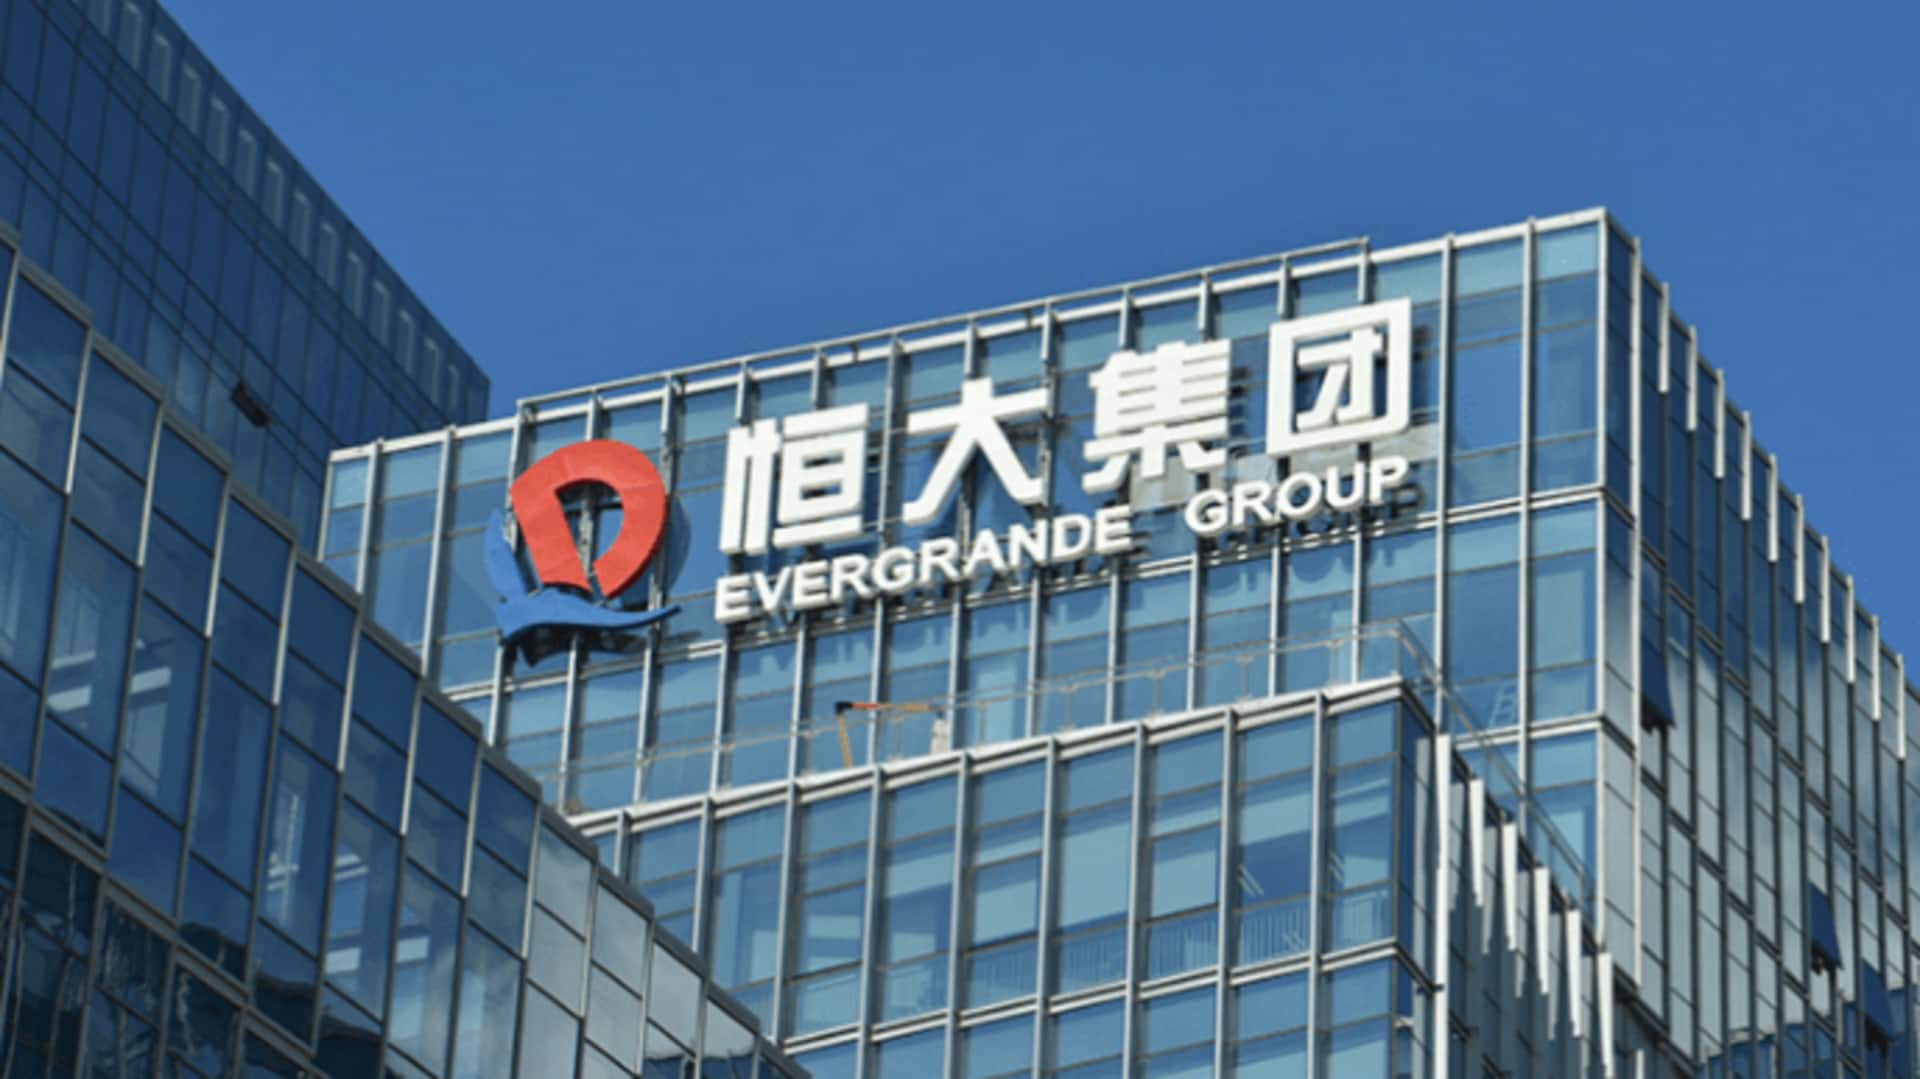 China Evergrande's debt restructuring woes dent confidence of property investors